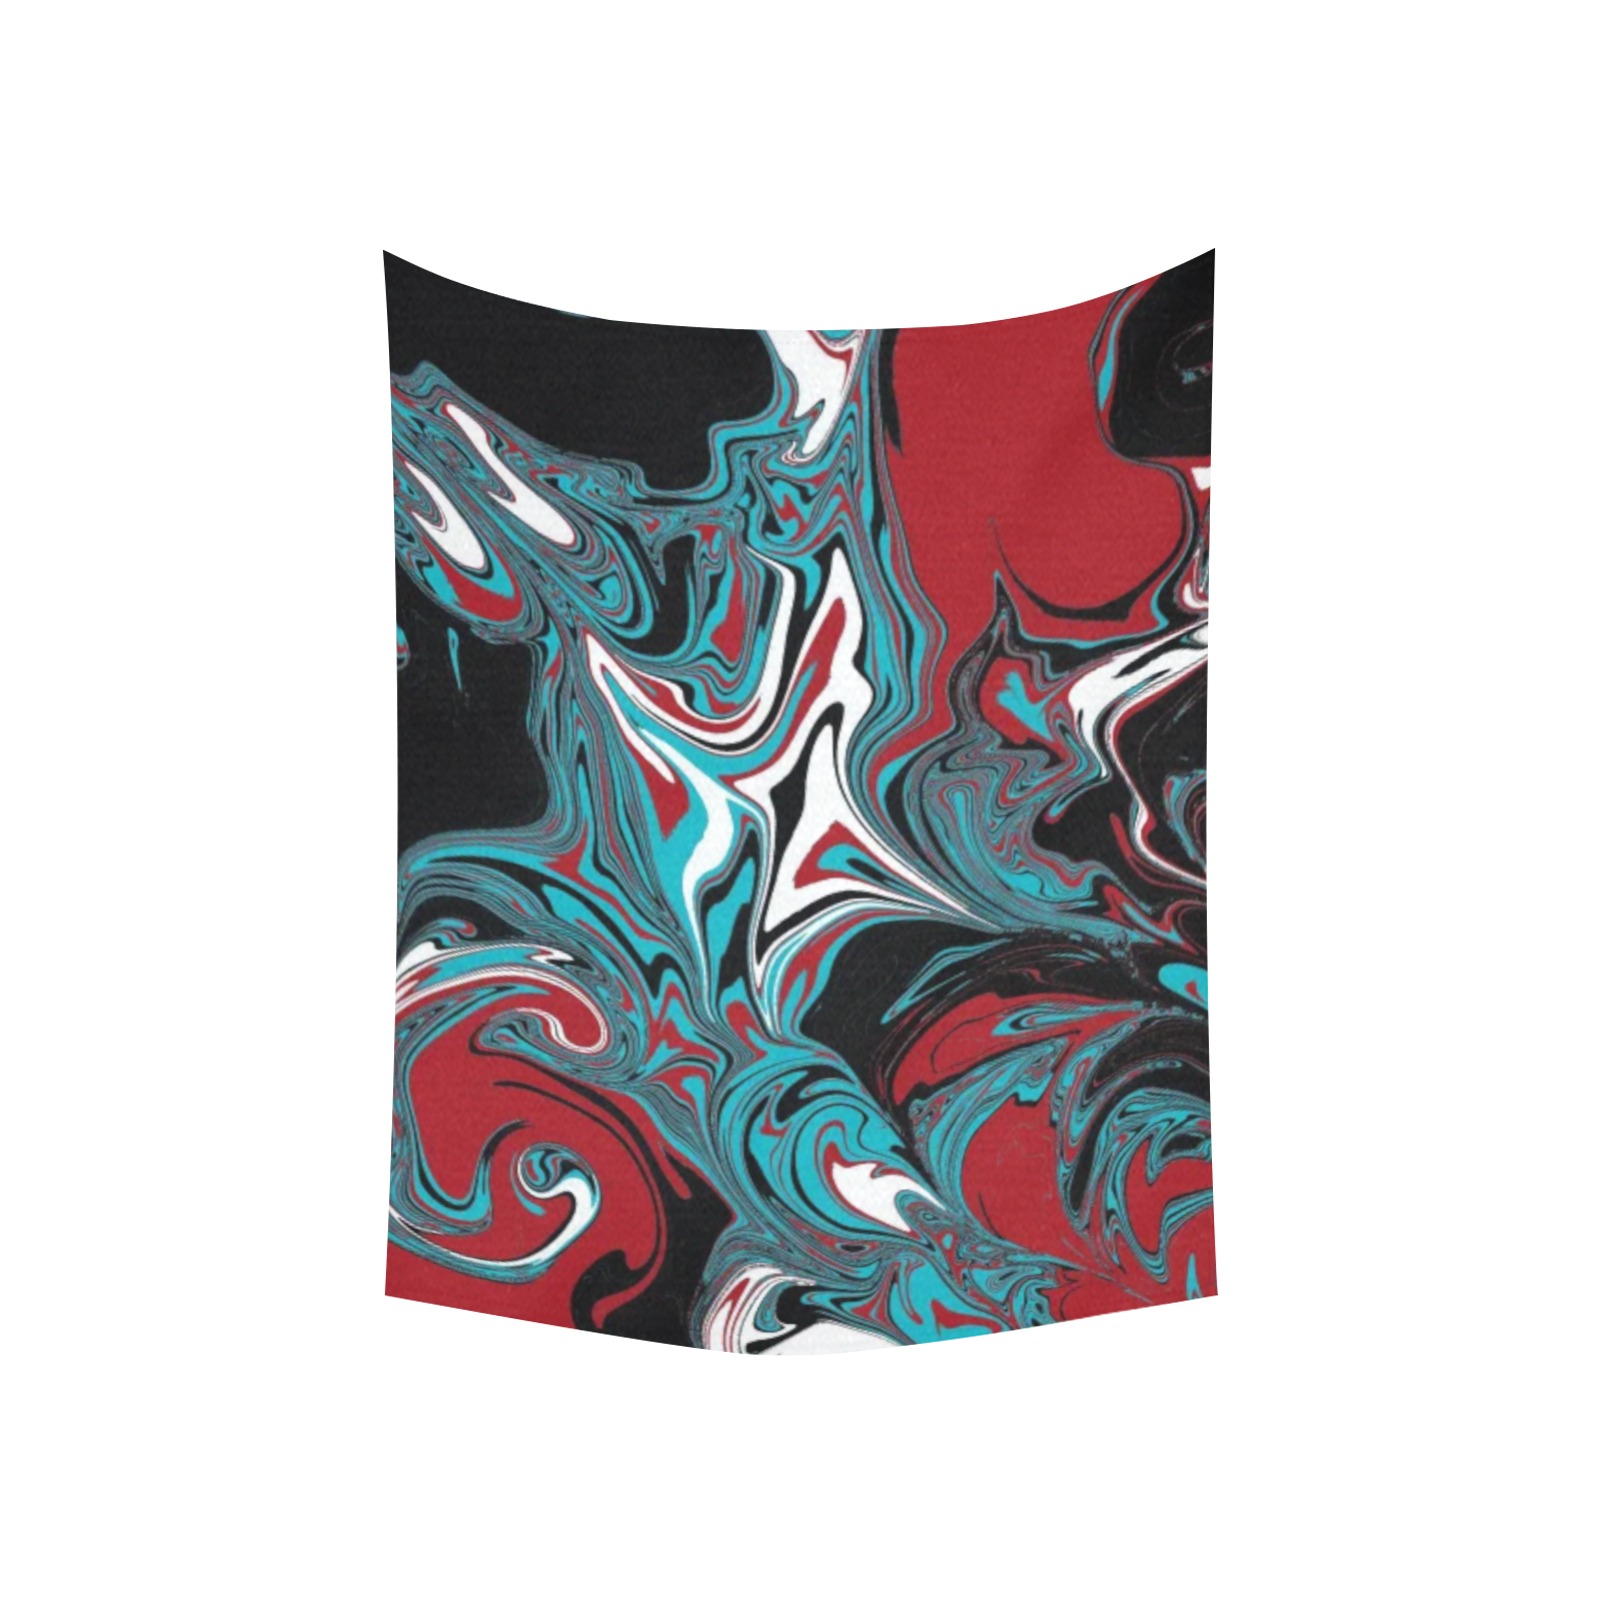 Dark Wave of Colors Cotton Linen Wall Tapestry 30"x 40"